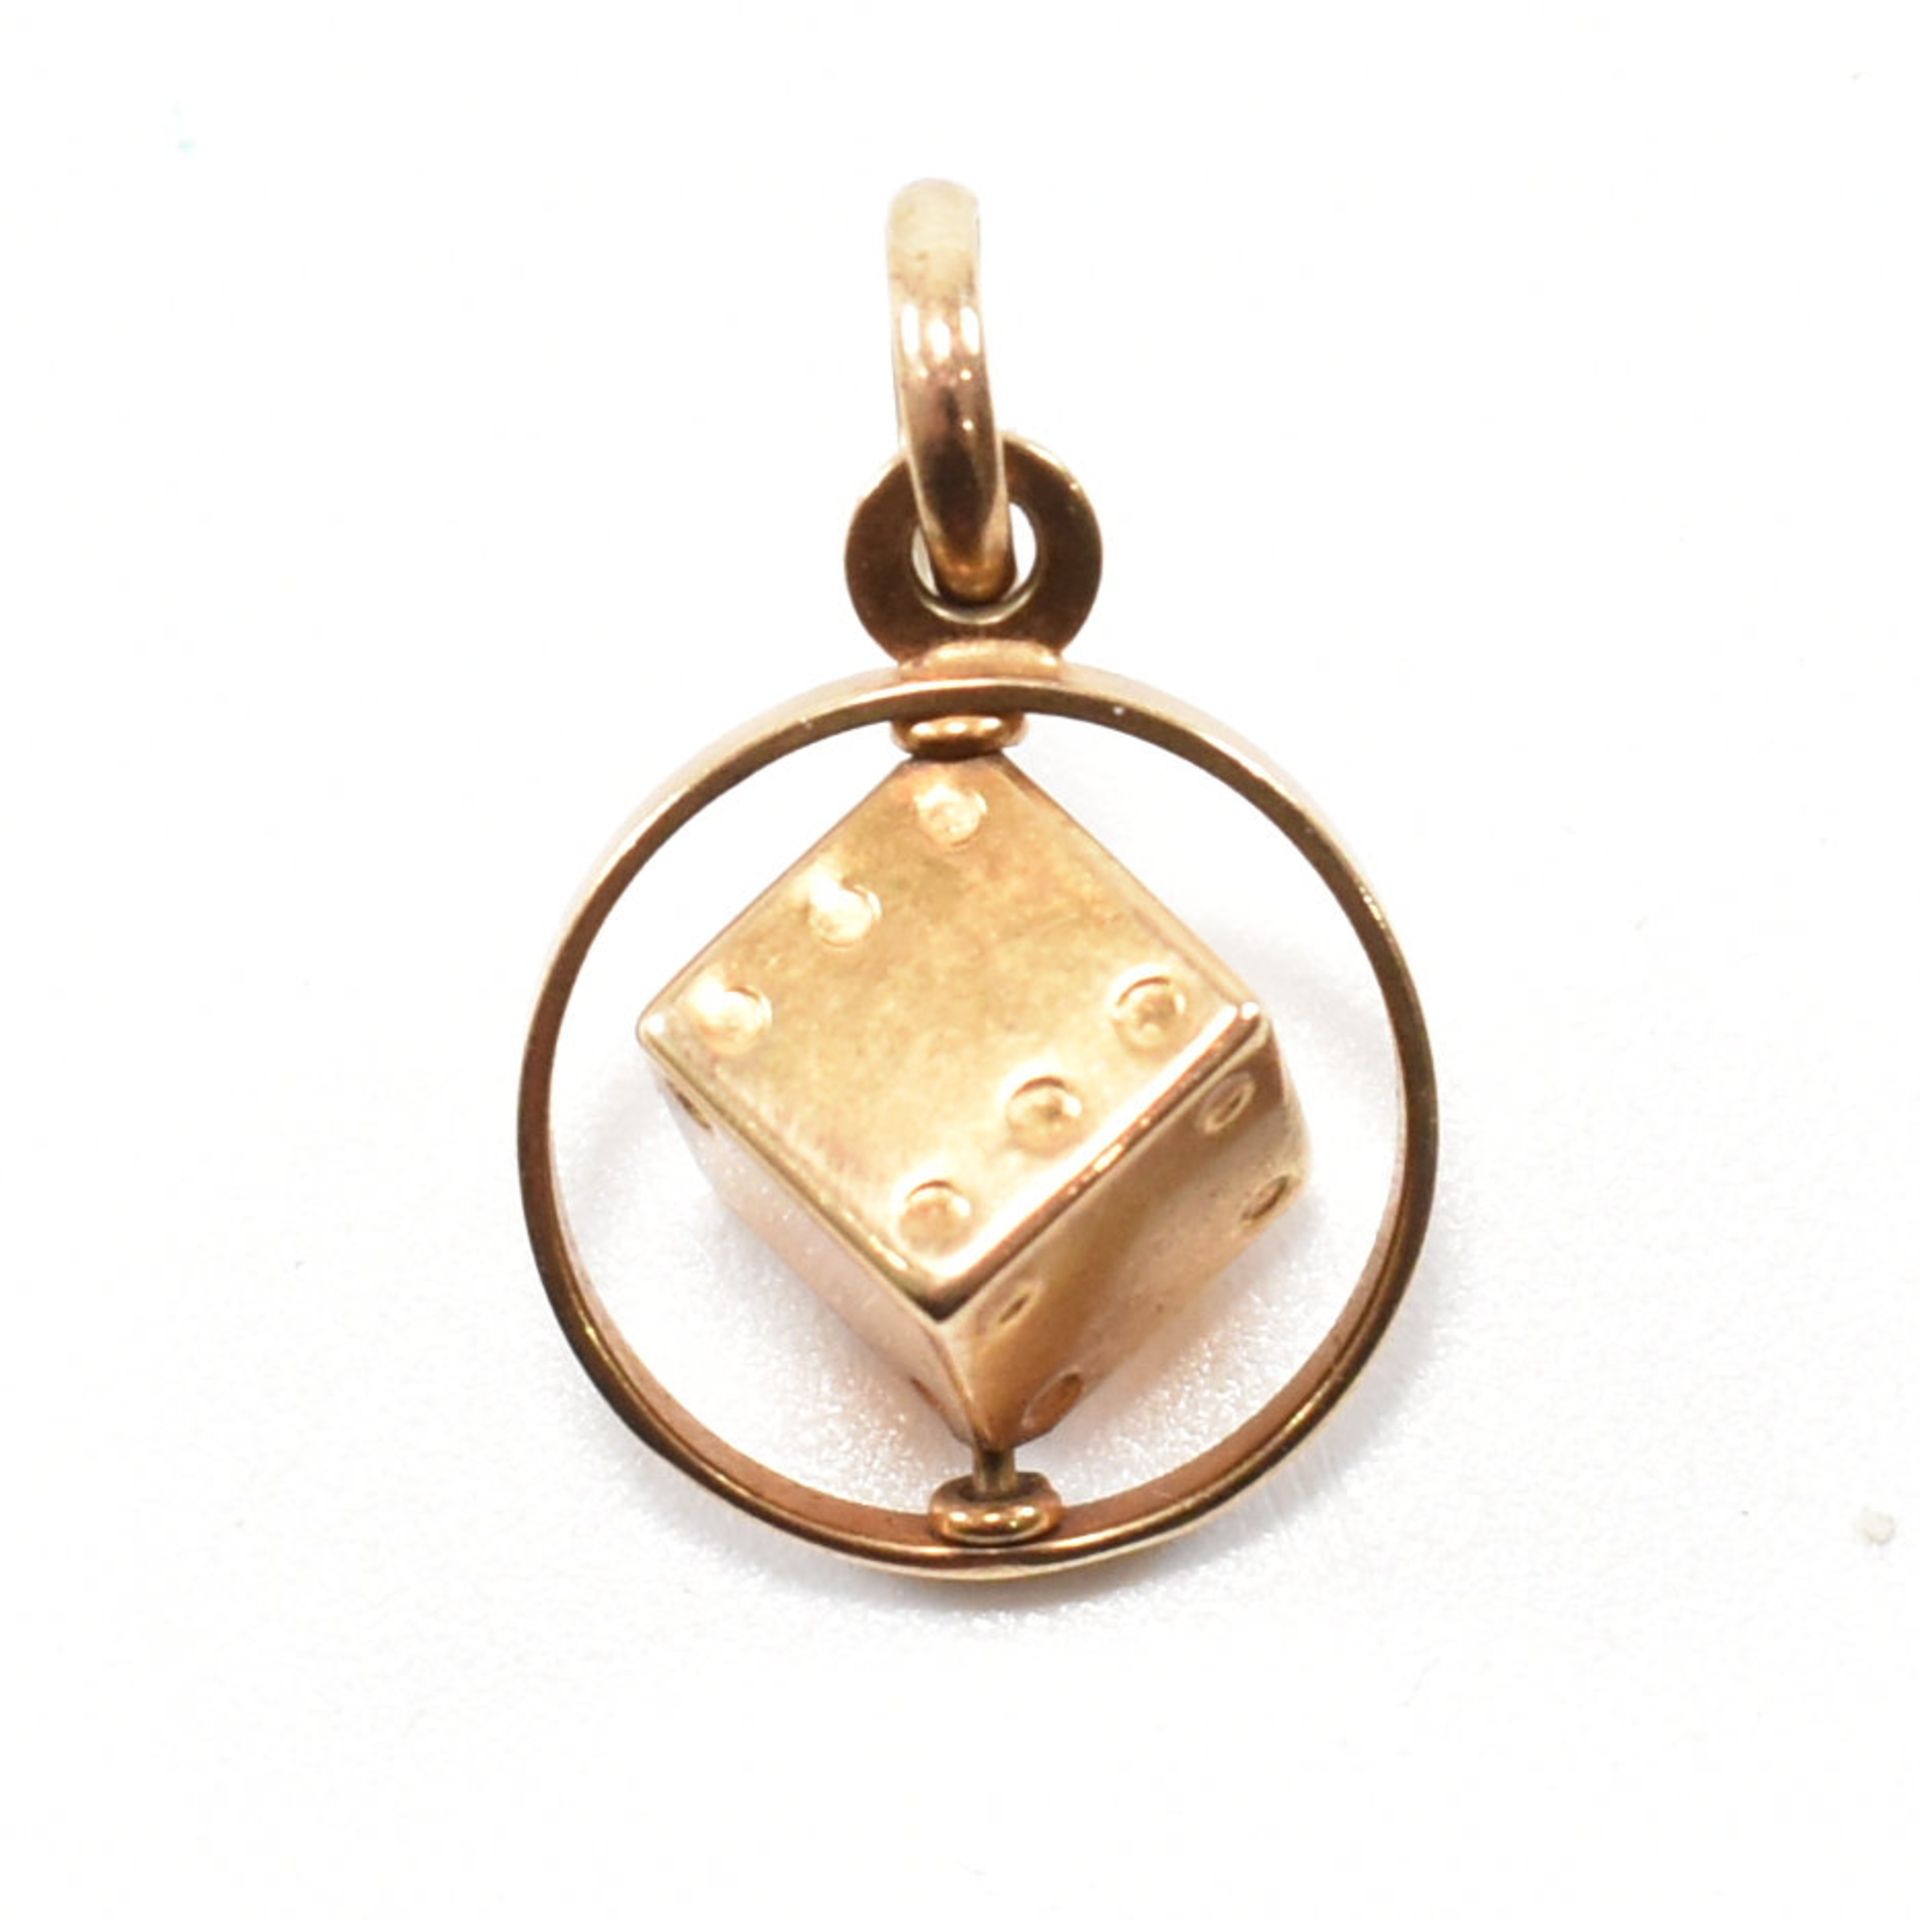 HALLMARKED 9CT GOLD ARTICULATED NECKLACE PENDANT - Image 2 of 6